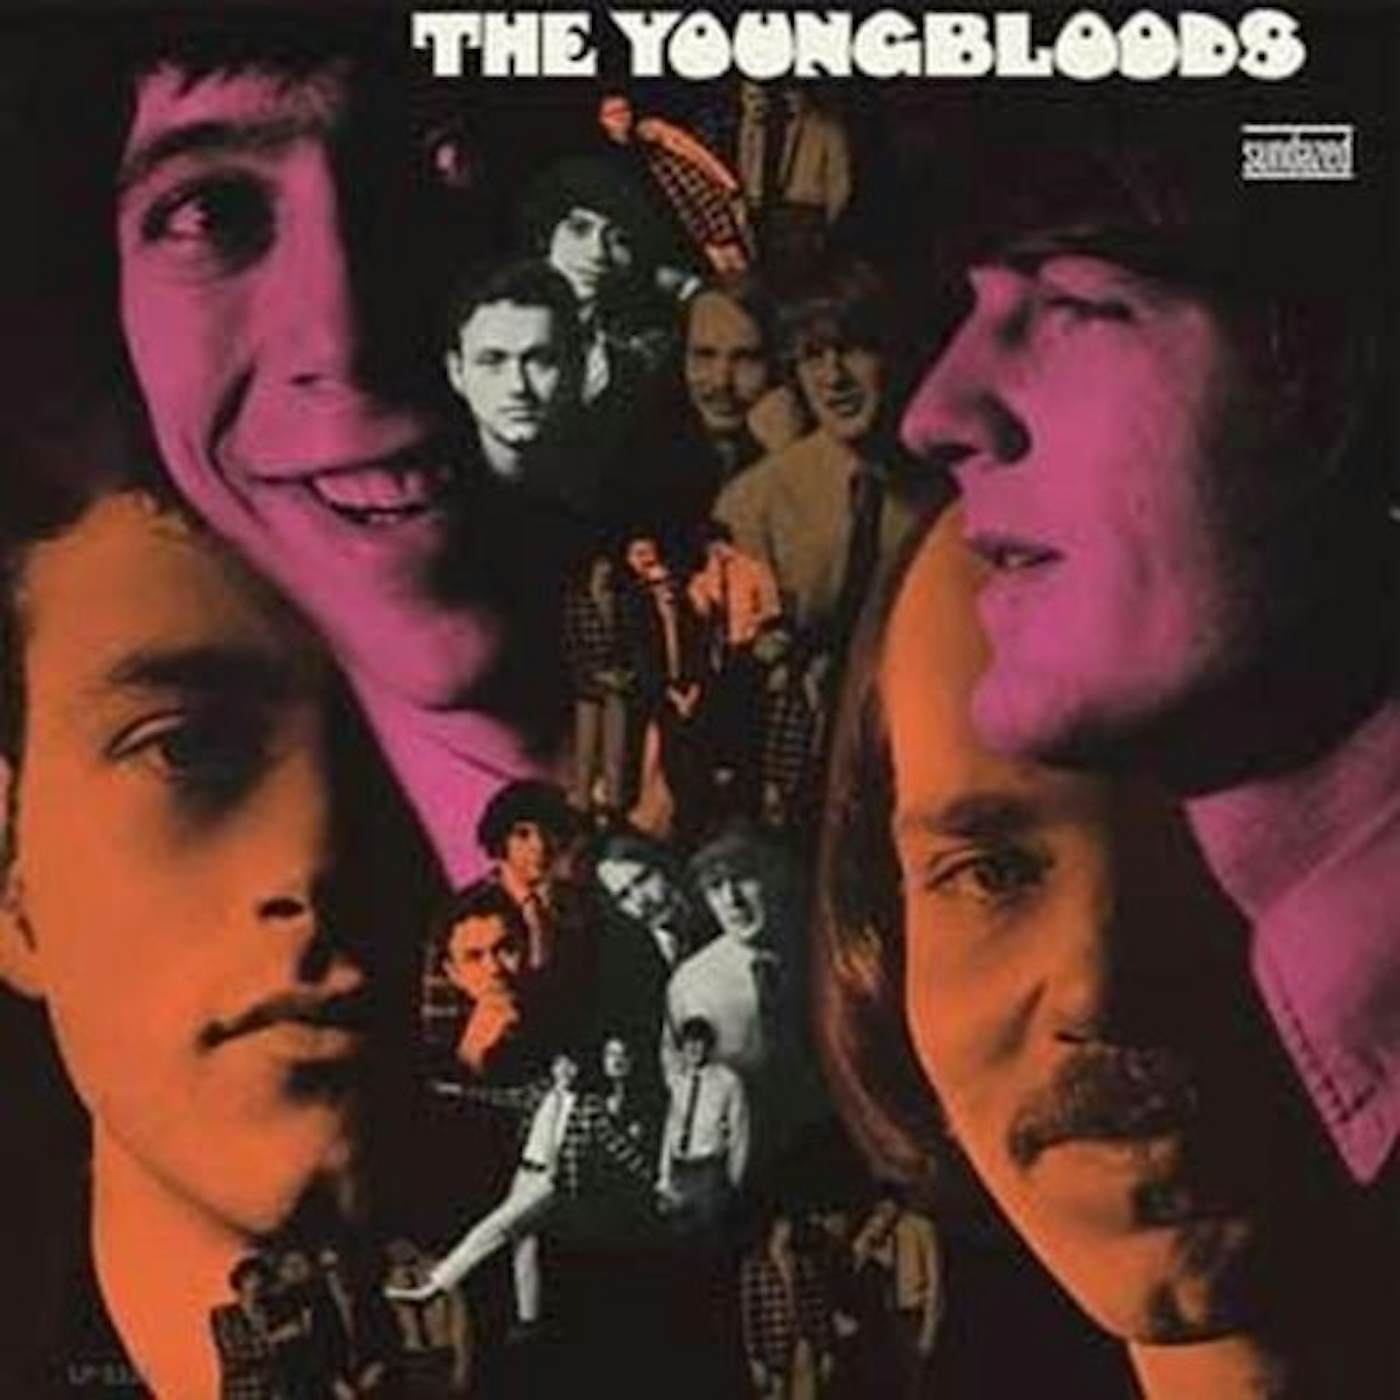 The Youngbloods Vinyl Record